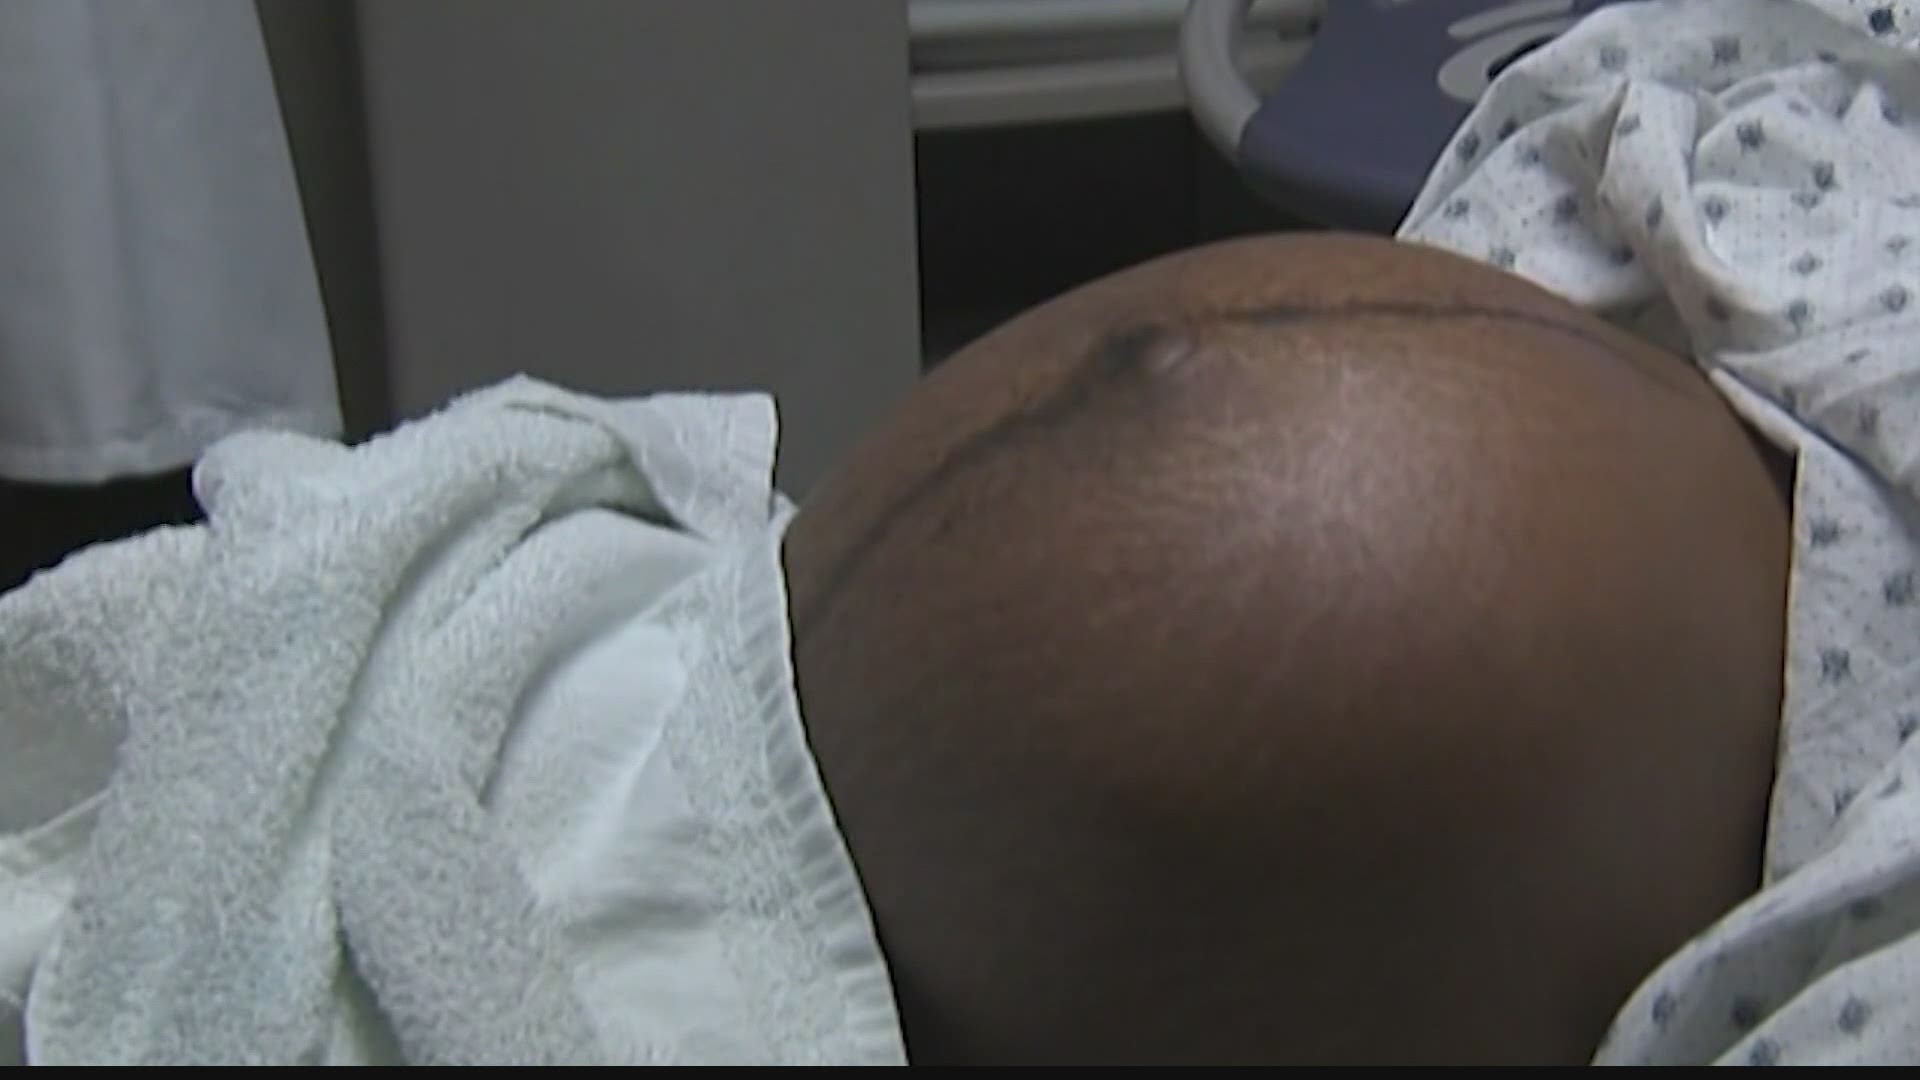 UAB doctor says it's safe for pregnant women to get any vaccine that is available.